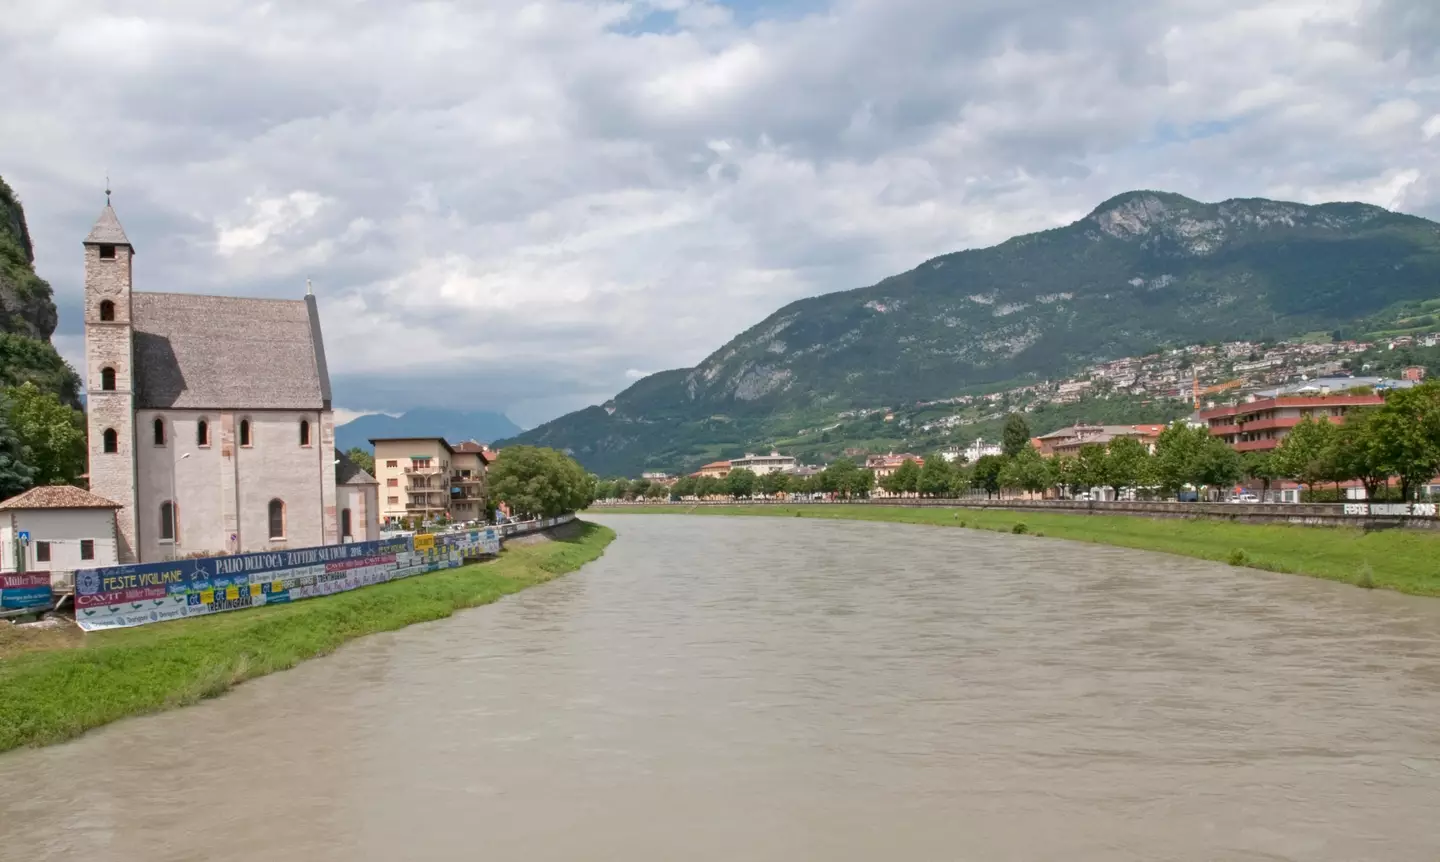 The Adige River runs through Trento and every year some unpopular locals (usually politicians) get dunked in it.